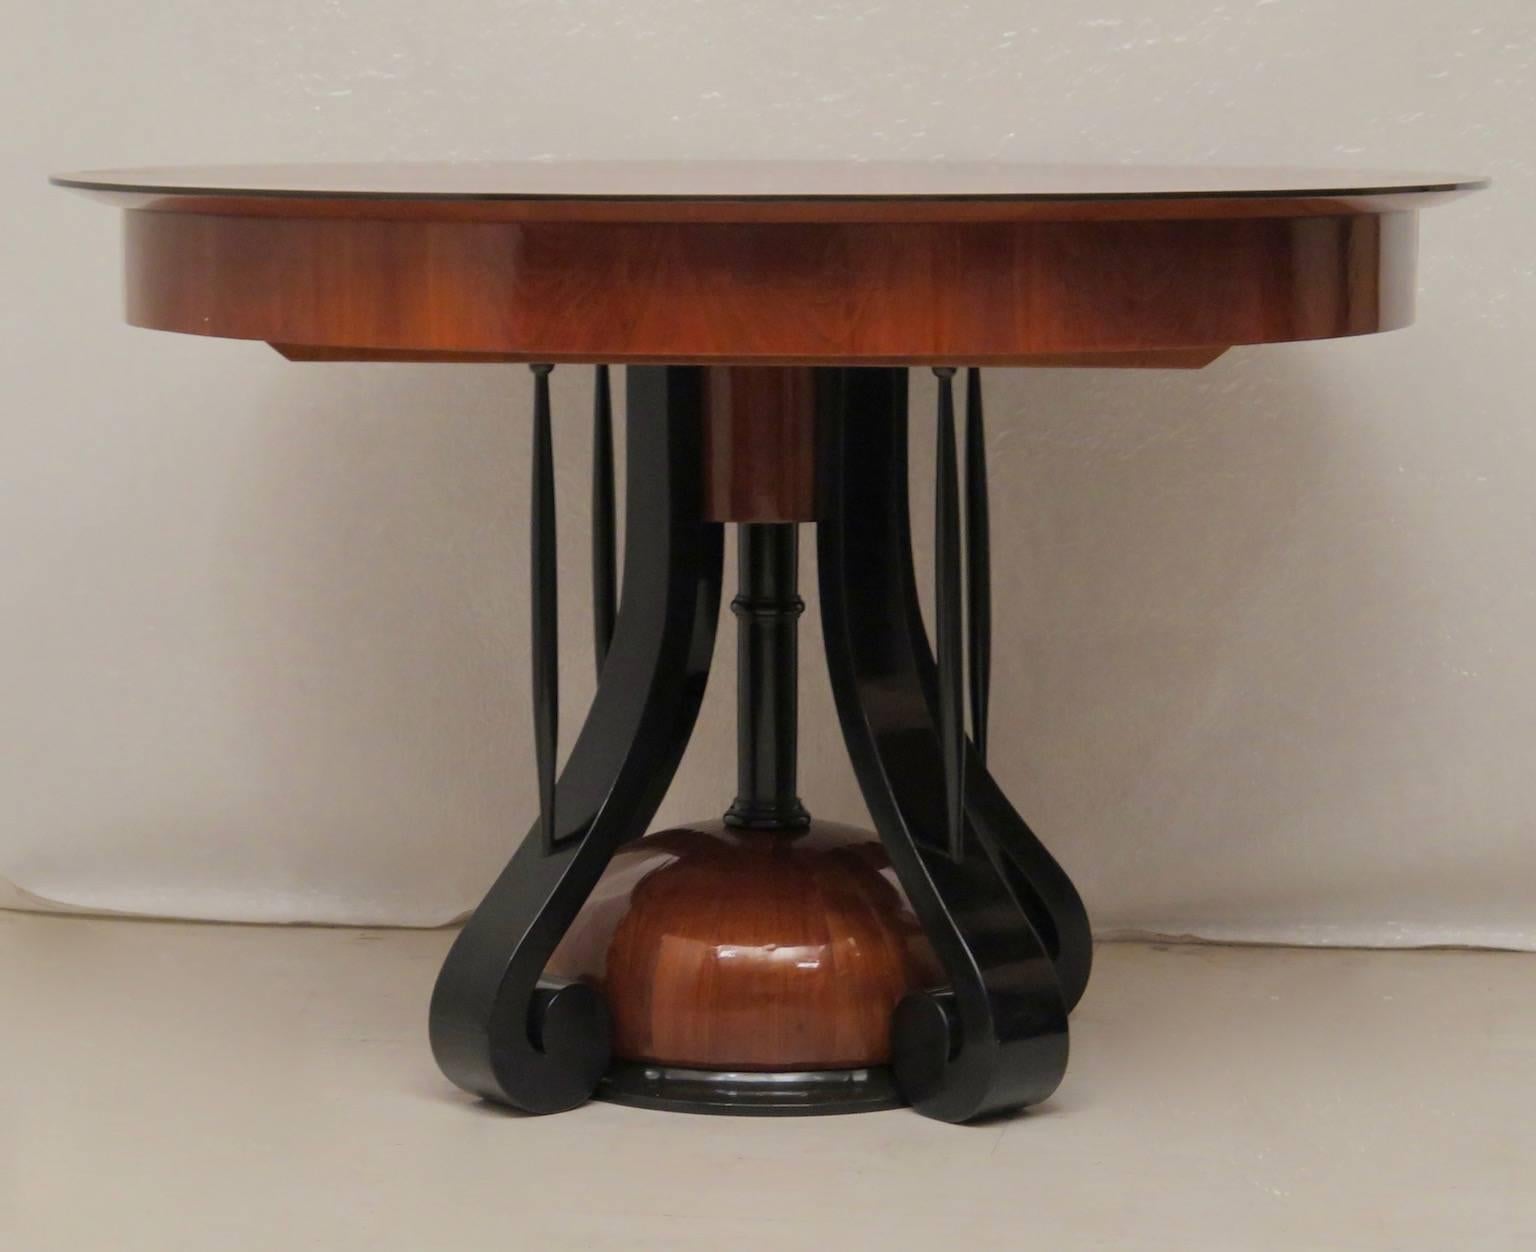 An important Biedermeier table, with a big round top and a very particular leg. The tabletop is veneered with a beautiful cheerywood, with parts forming the segments of the pie. The central leg is formed by a semi orb veneered in cheerywood and by